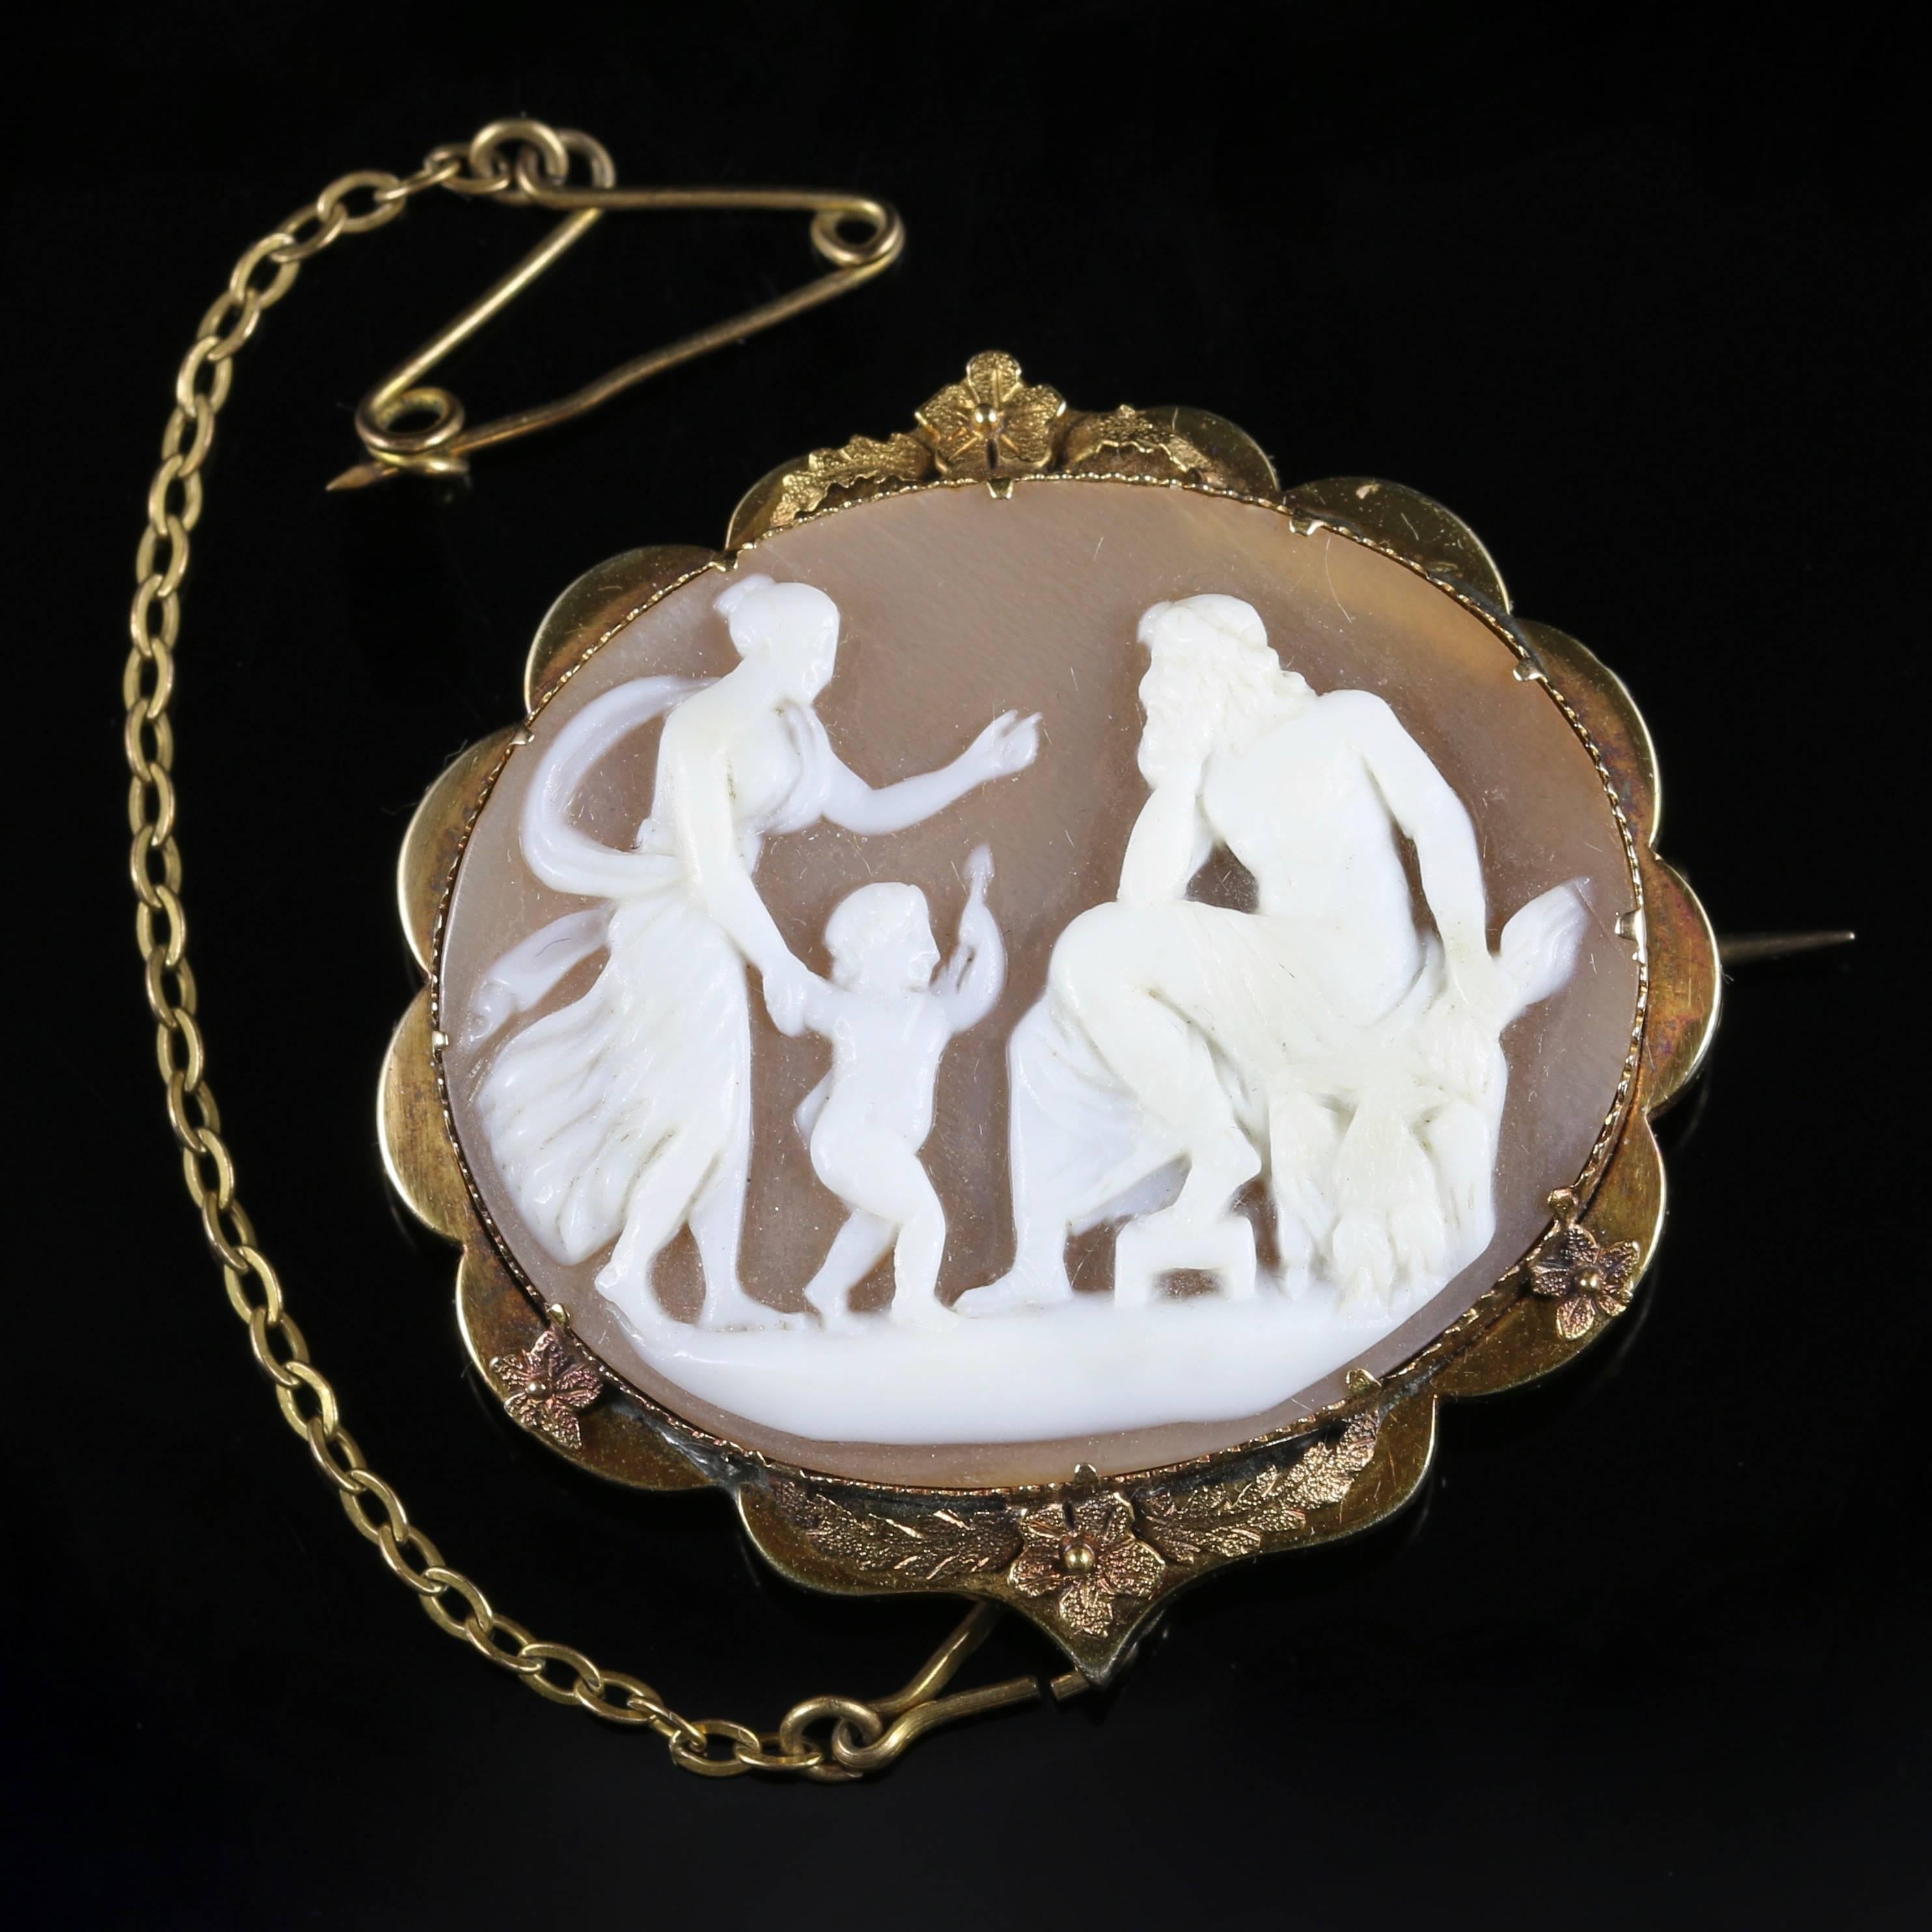 This is a fabulous Victorian cameo brooch in its original box, Circa 1900

The frame is set in 9ct Gold depicting pretty flowers, so lovely!

This brooch is hand carved from bull mouth shell, it is very well executed and has developed a lovely